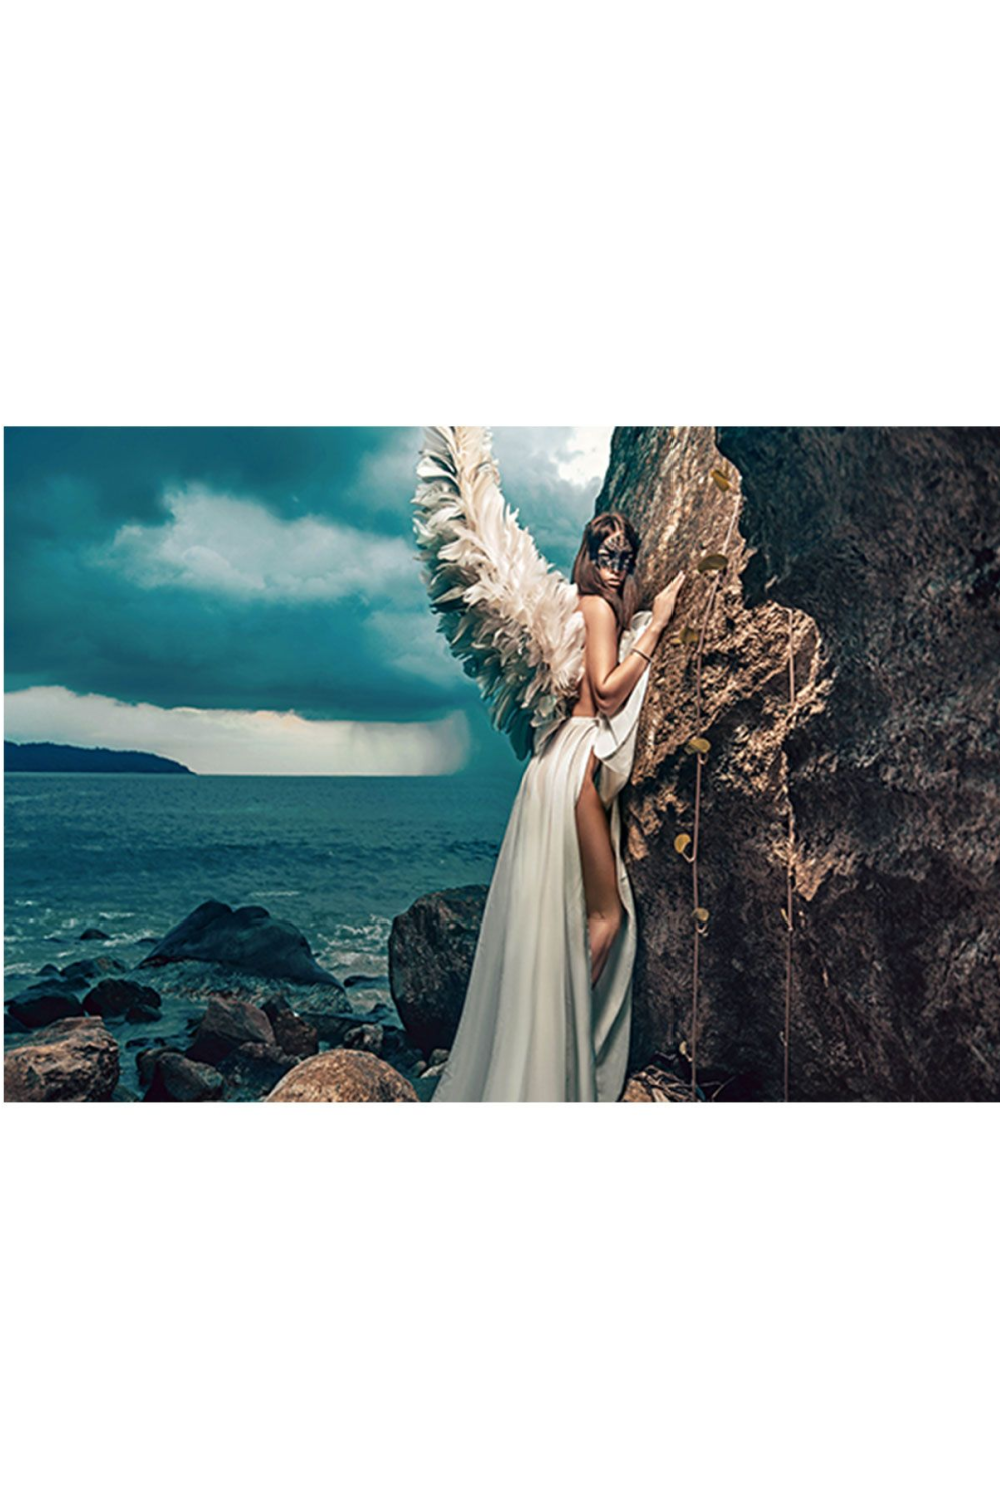 Female Angel Photographic Artwork | Andrew Martin A Storm Is Coming | Oroa.com